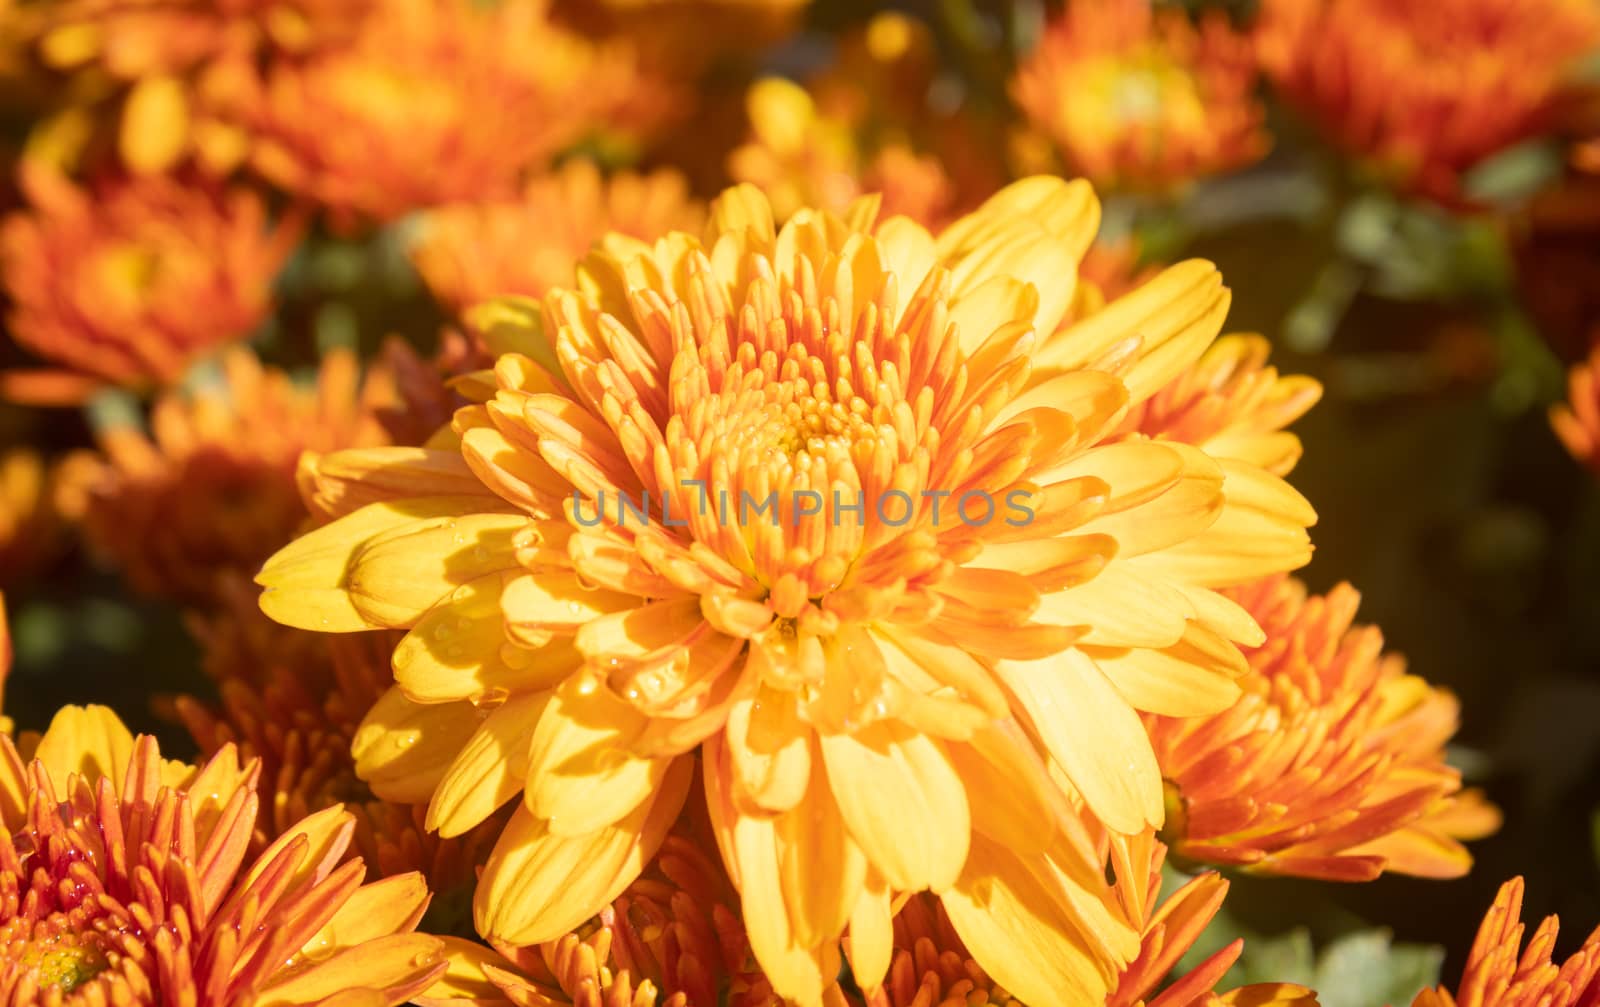 Orange Chrysanthemum or Mums Flowers on Green Leaves Background in Garden with Natural Light on Center Frame